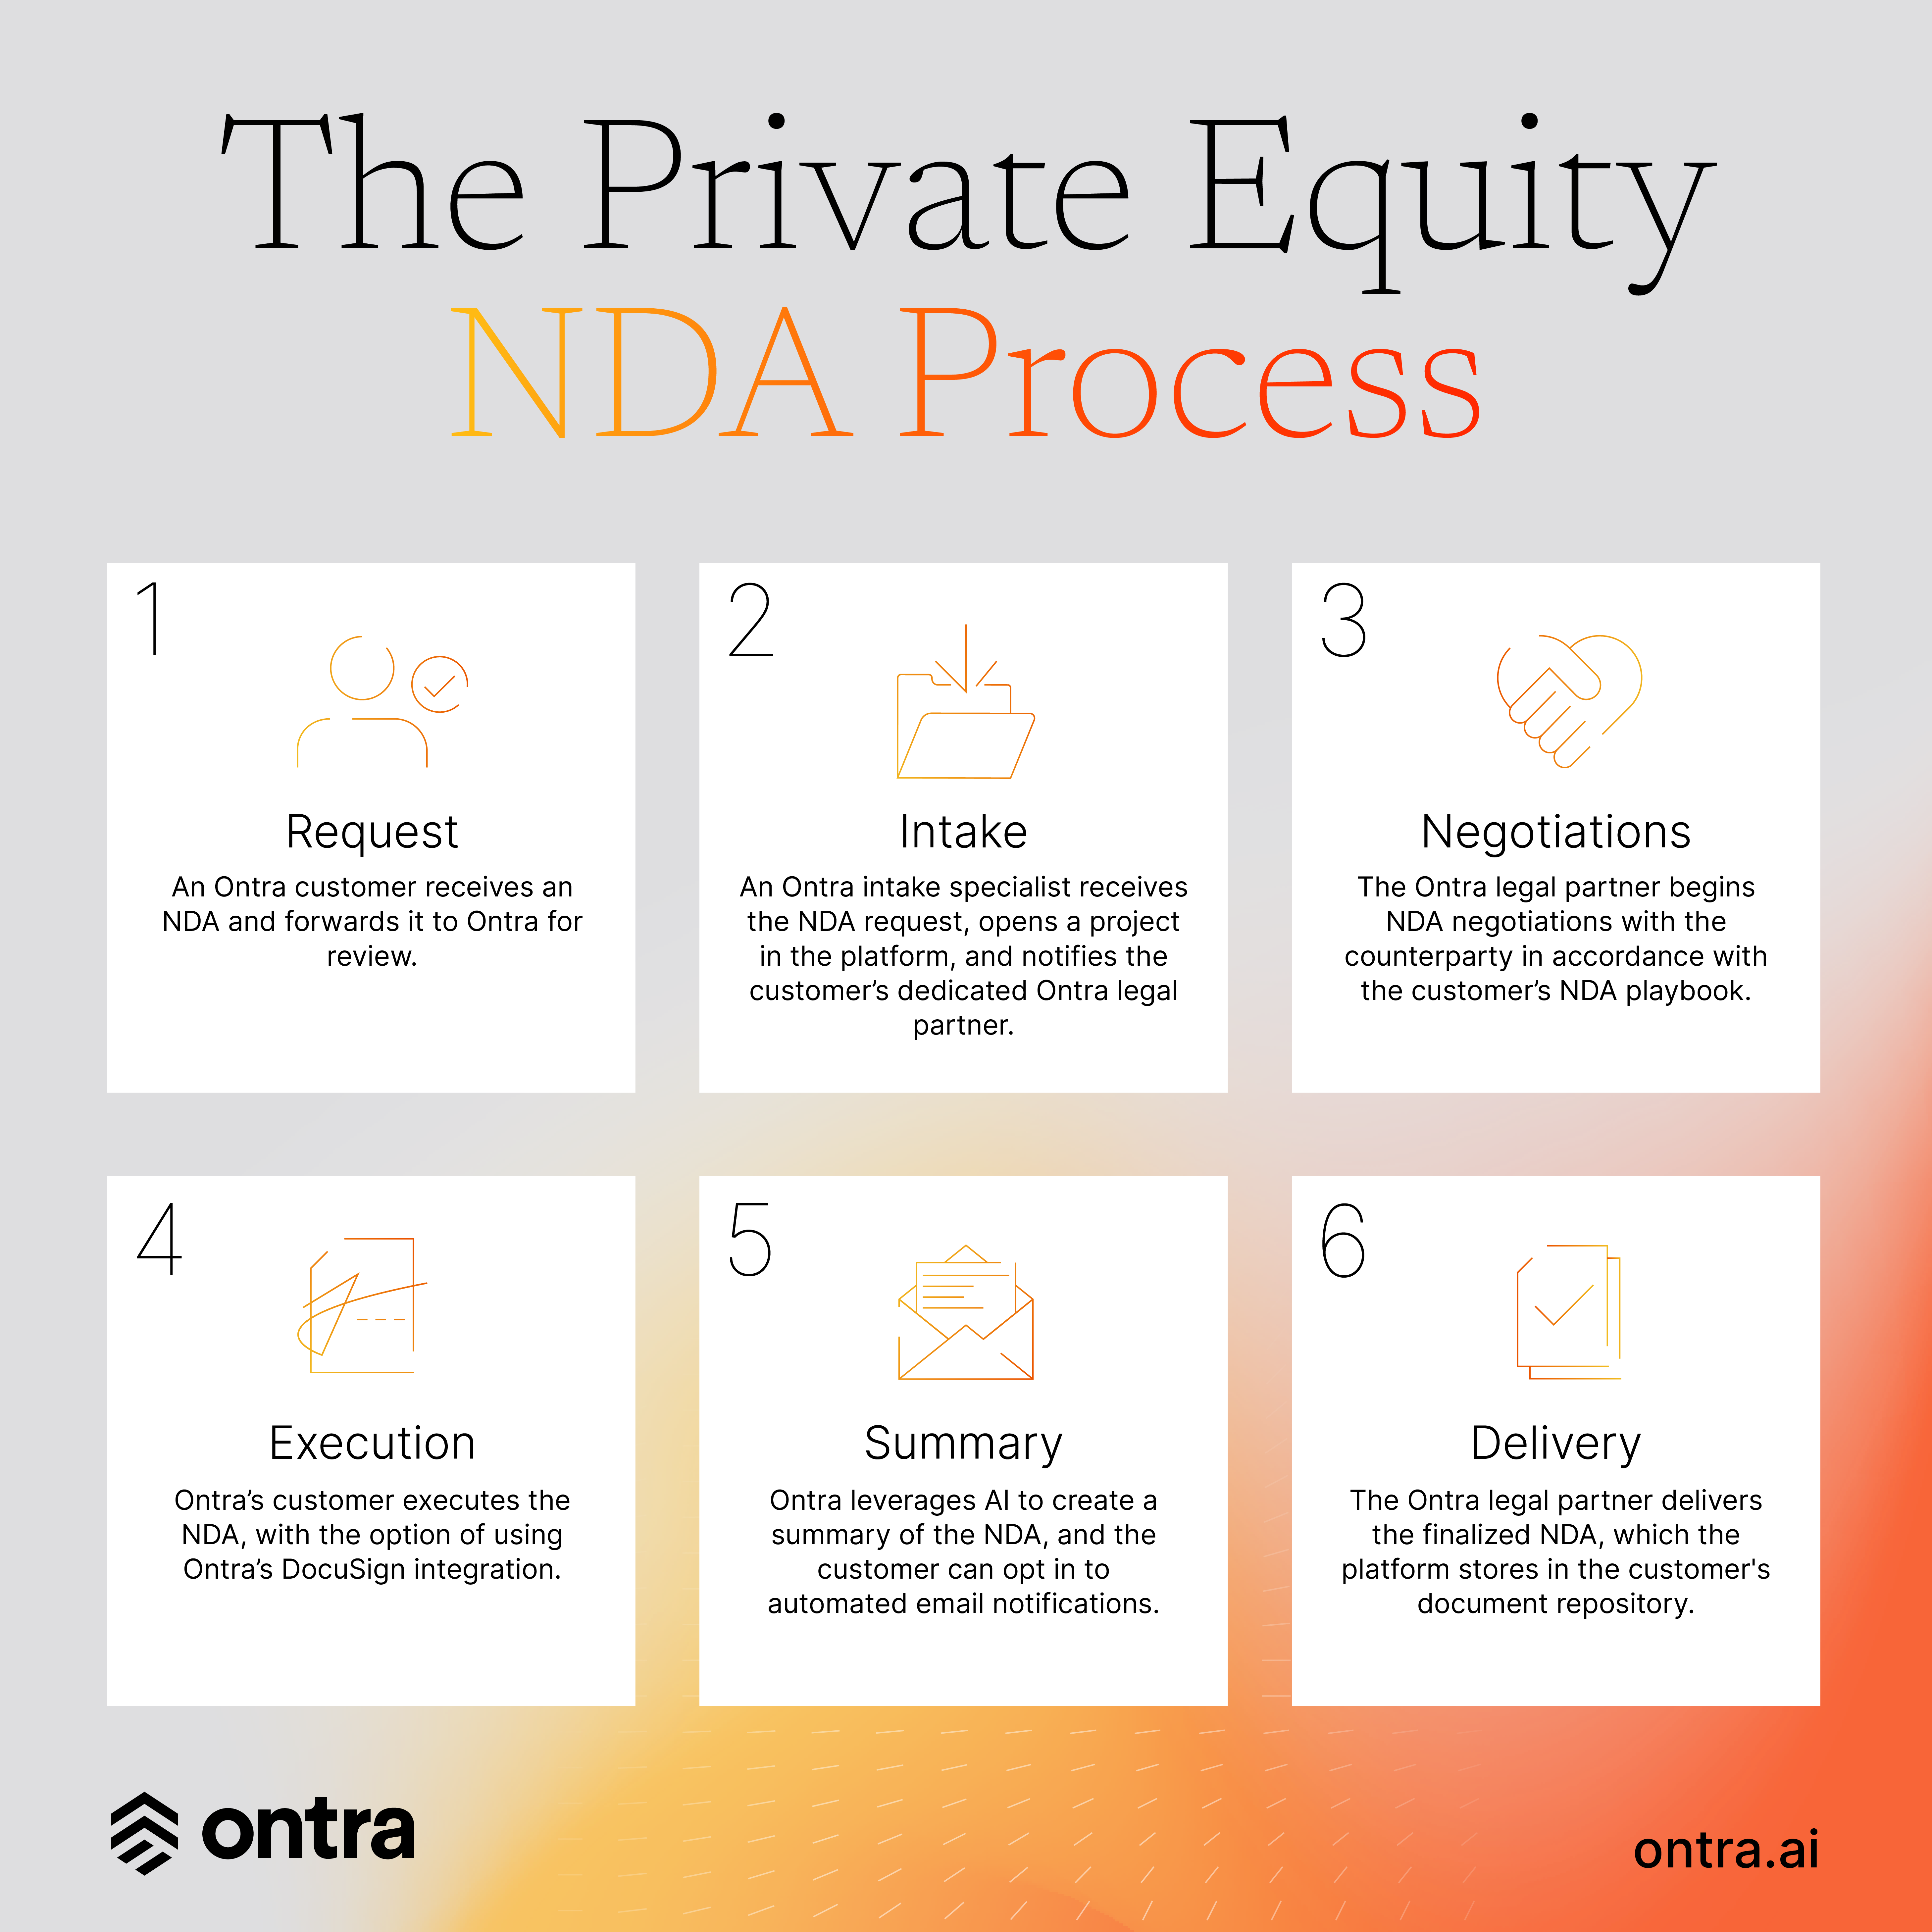 Ontra's Contract Automation solution speeds up the NDA process for private equity deals